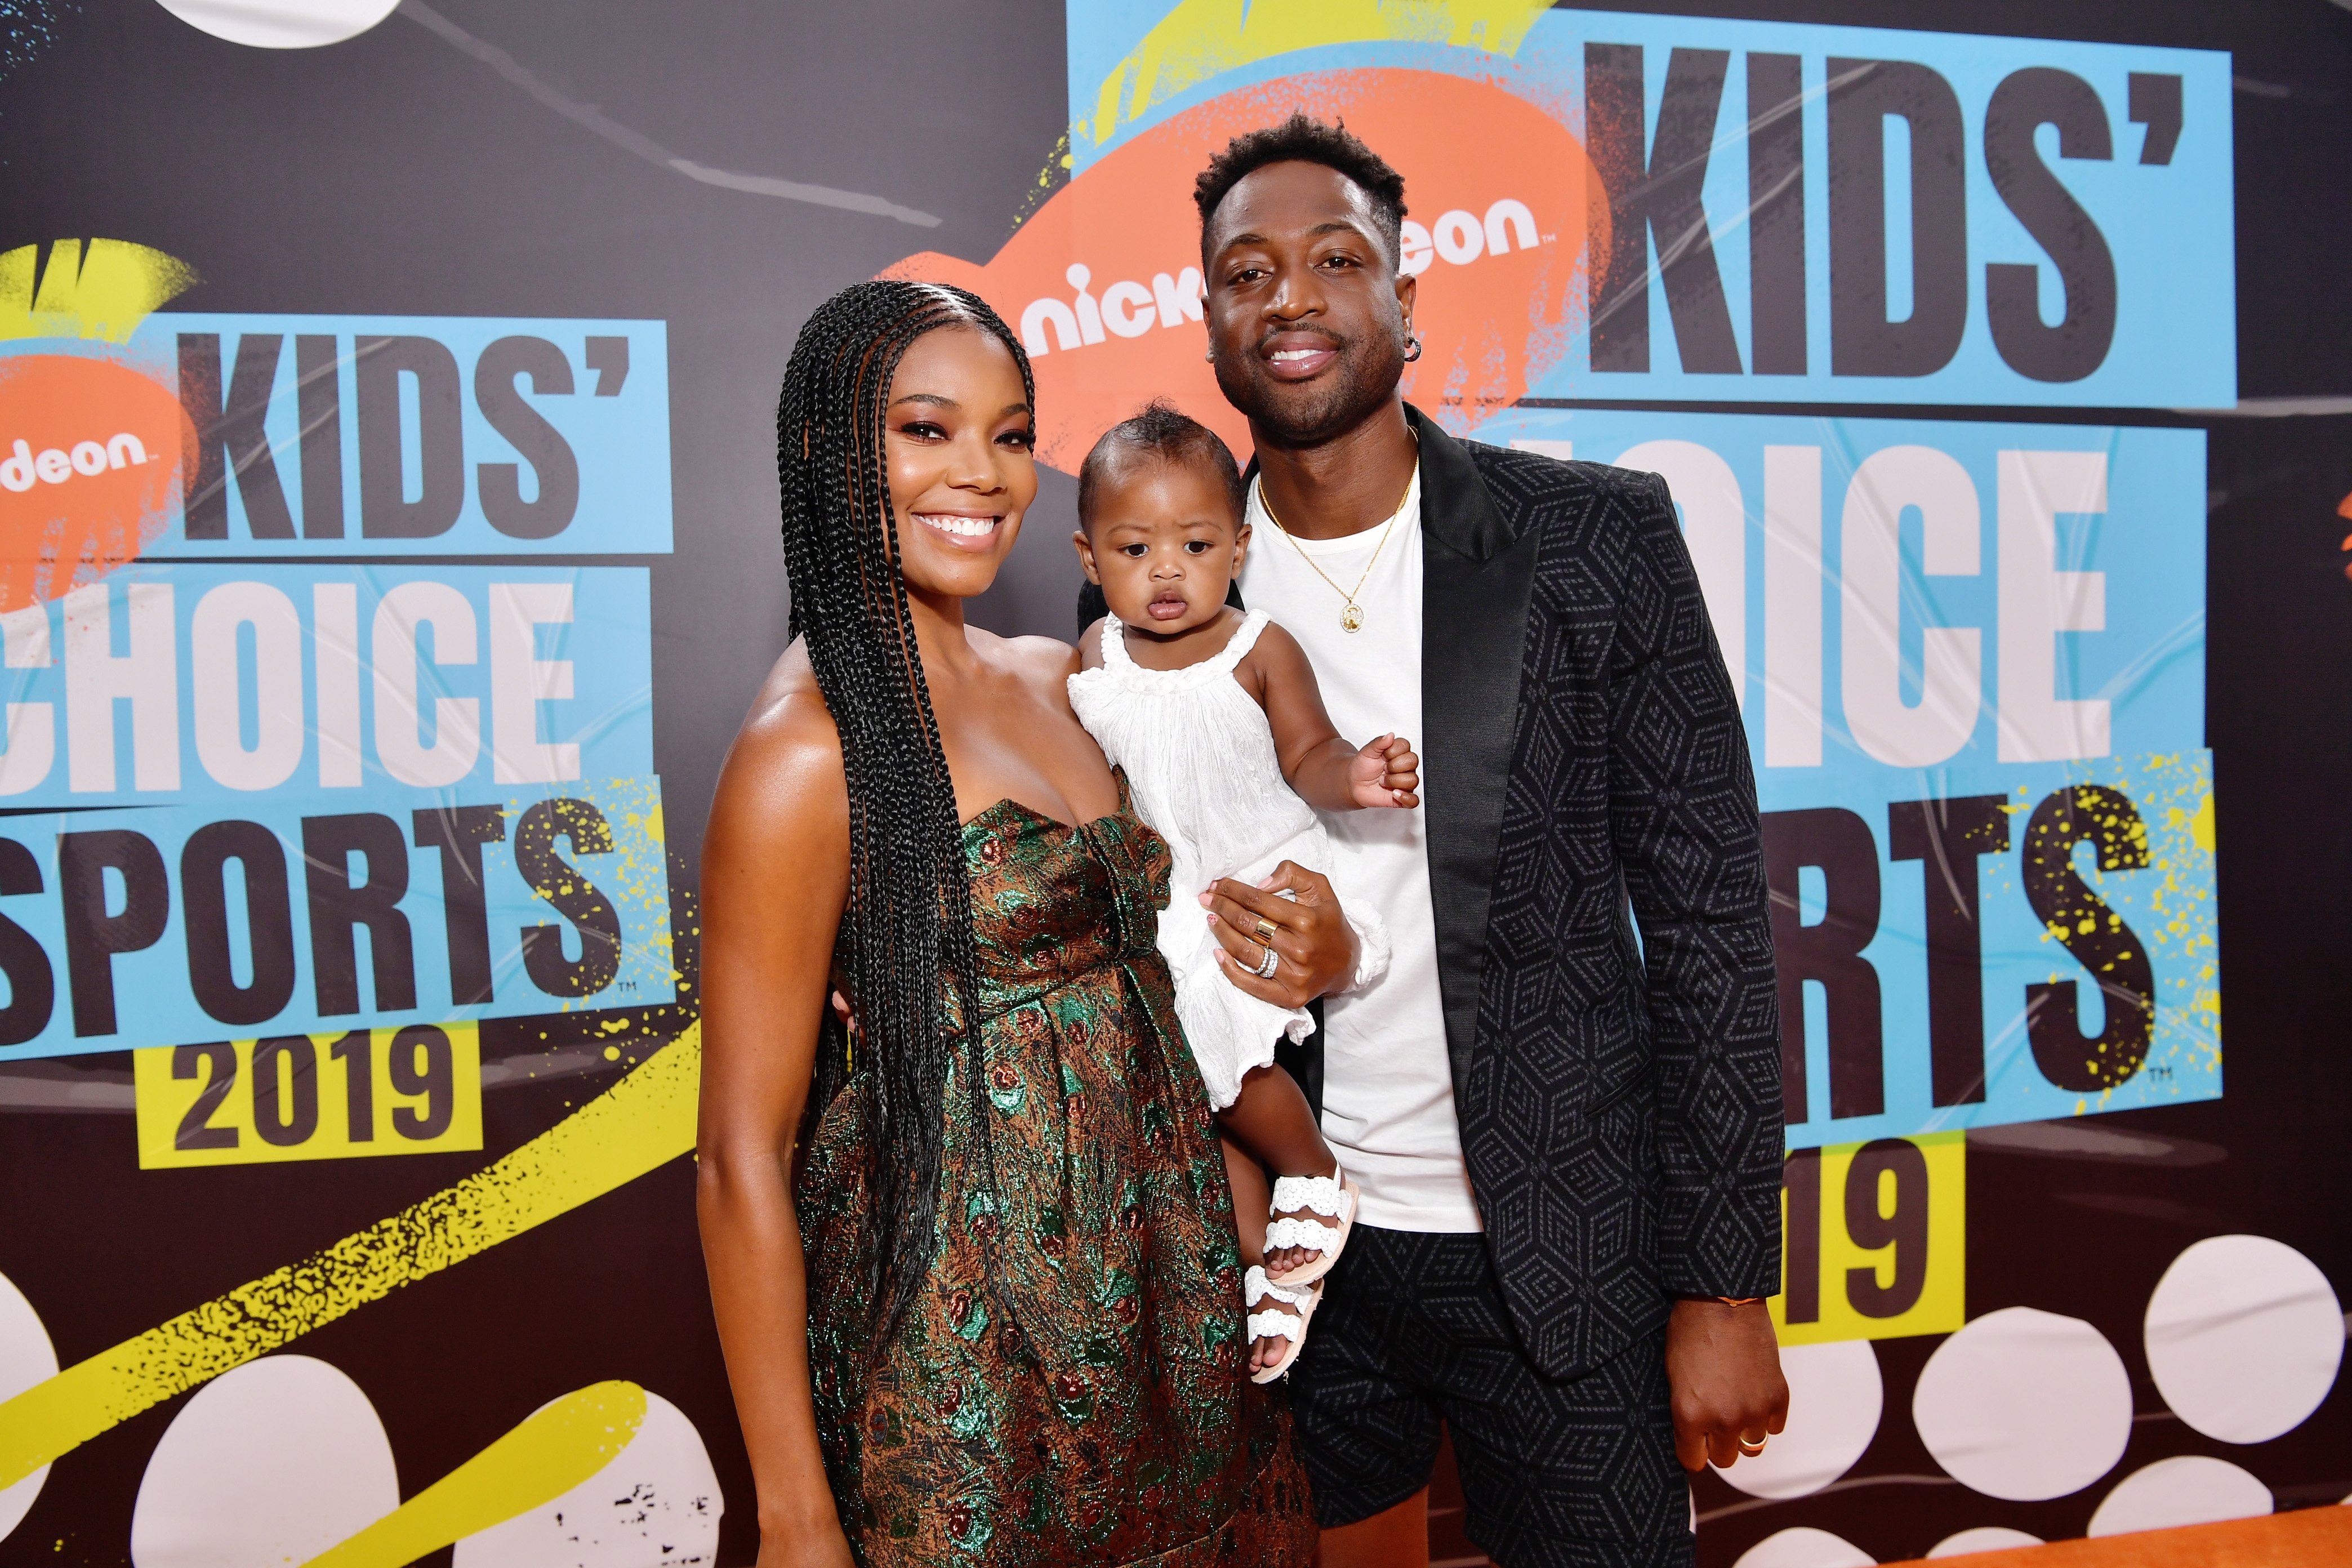 Gabrielle Union, Dwyane Wade, and their daughter Kaavia at the 2019 Kids Choice Sports Awards | Source: Getty Images/GlobalImagesUkraine